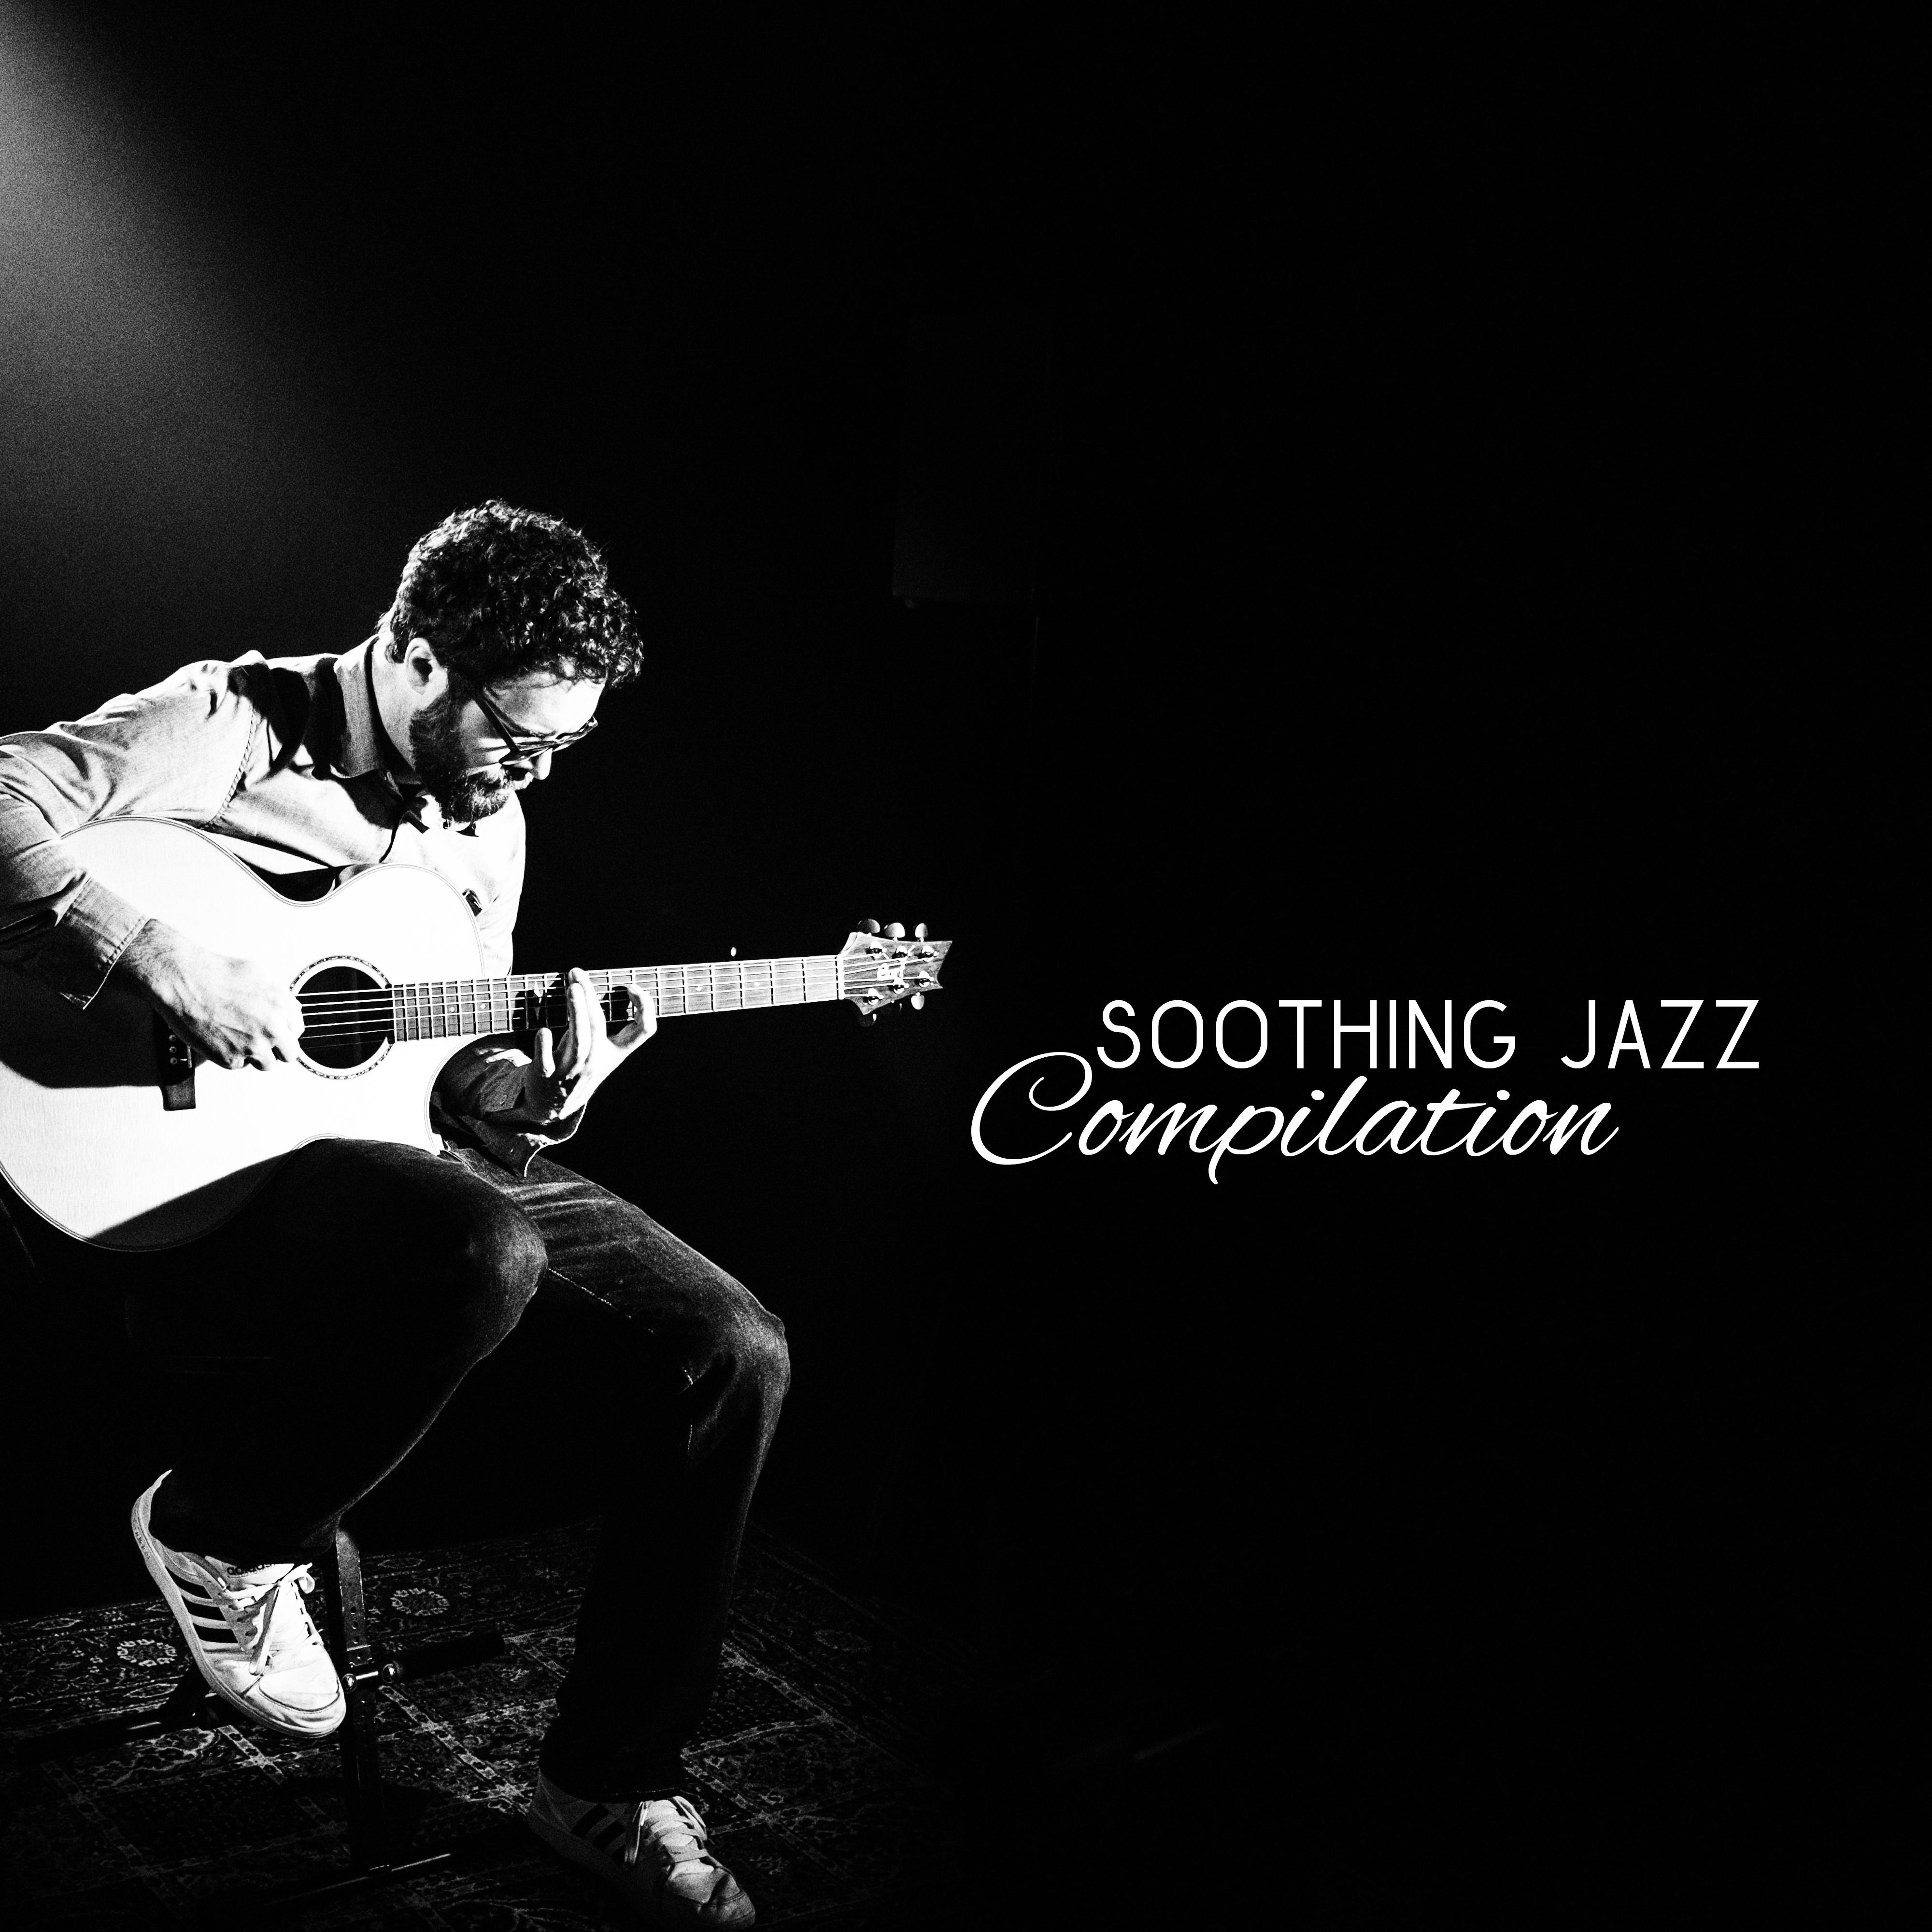 Soothing Jazz Compilation  Smooth Jazz 2017, Relaxed Jazz, Ambient Jazz, Lounge 2017